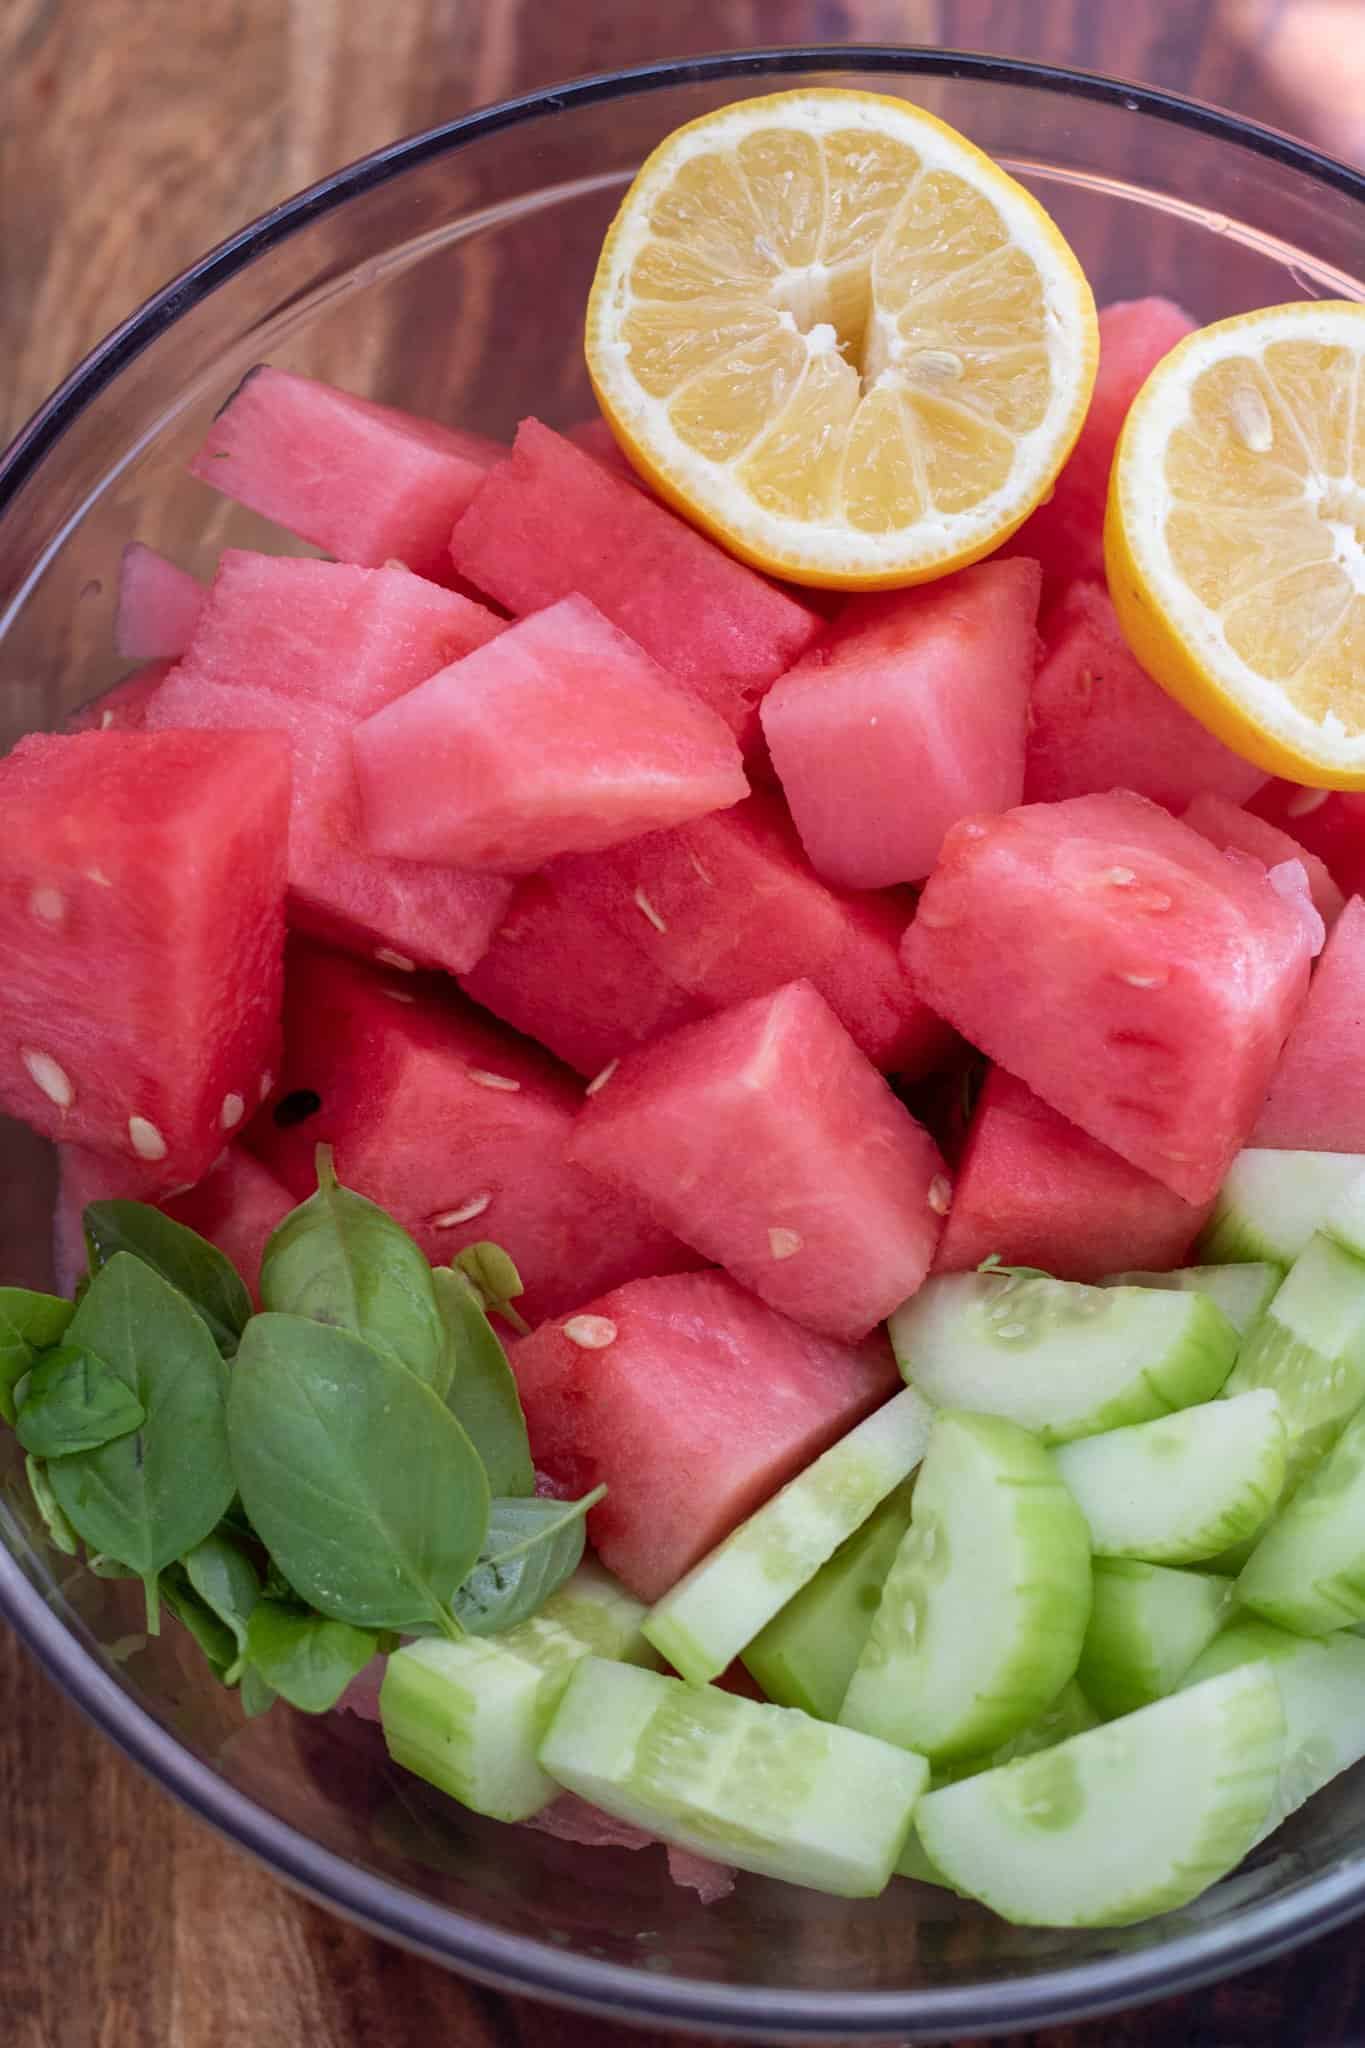 A large glass bowl filled with cubed watermelon, sliced cucumbers, fresh basil leavevs and lemons.